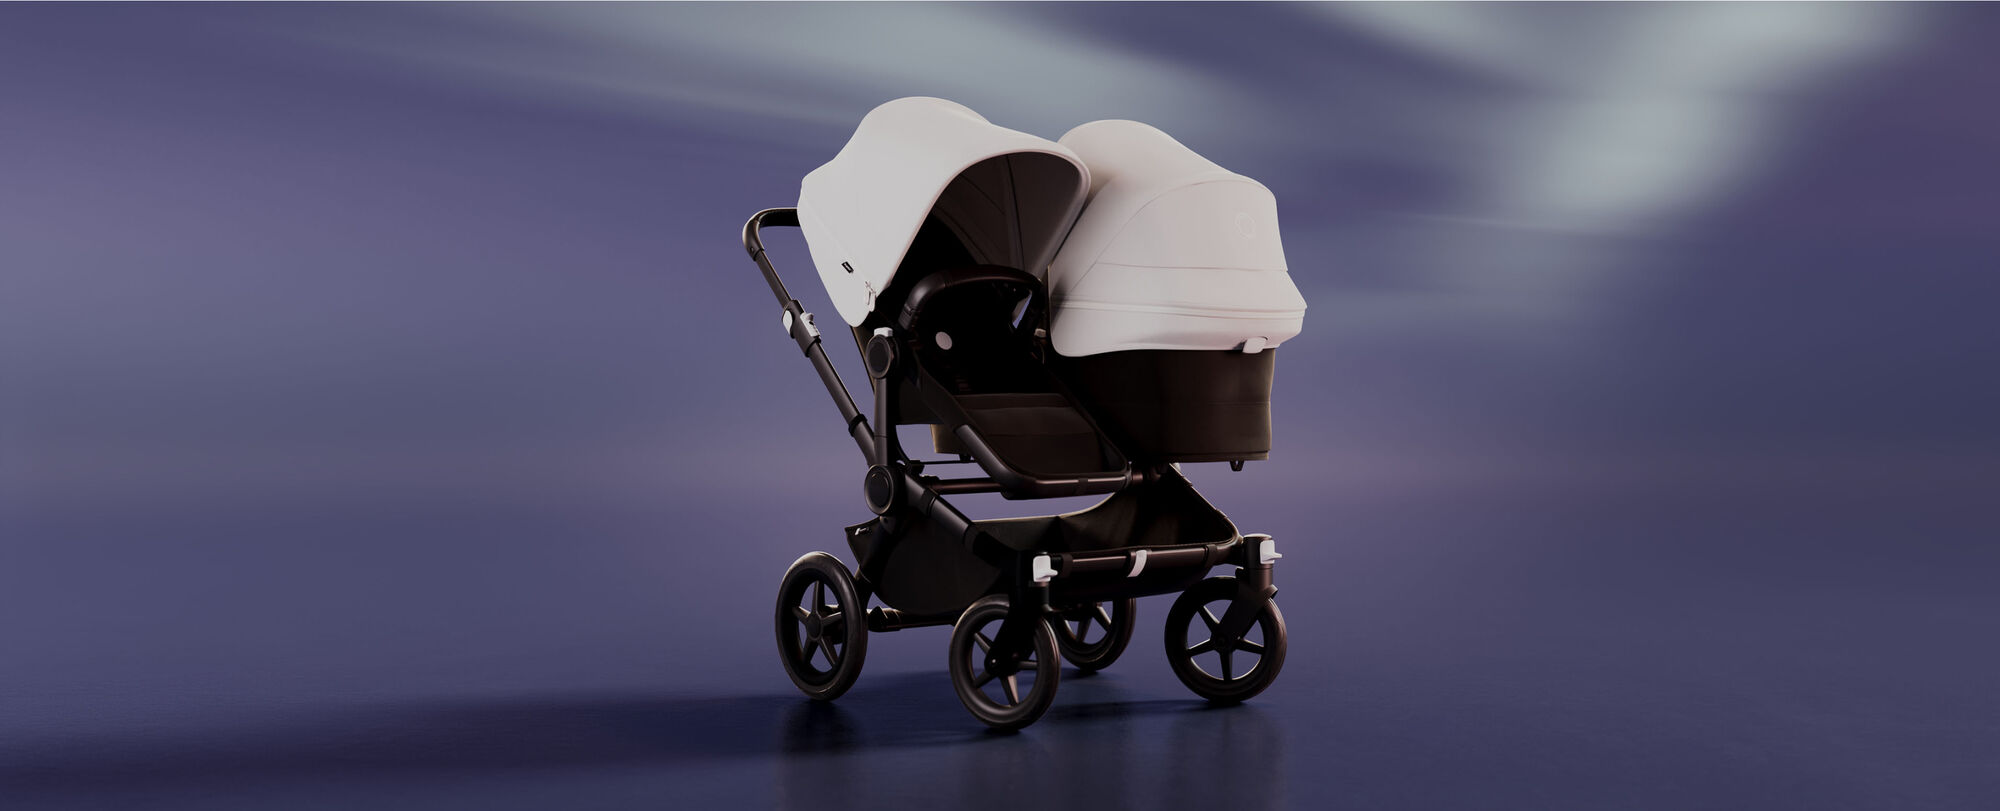 A Bugaboo Donkey 5 Duo stroller with a seat and a bassinet. The sun canopy is in Misty White. The background is blue with streaks of white.